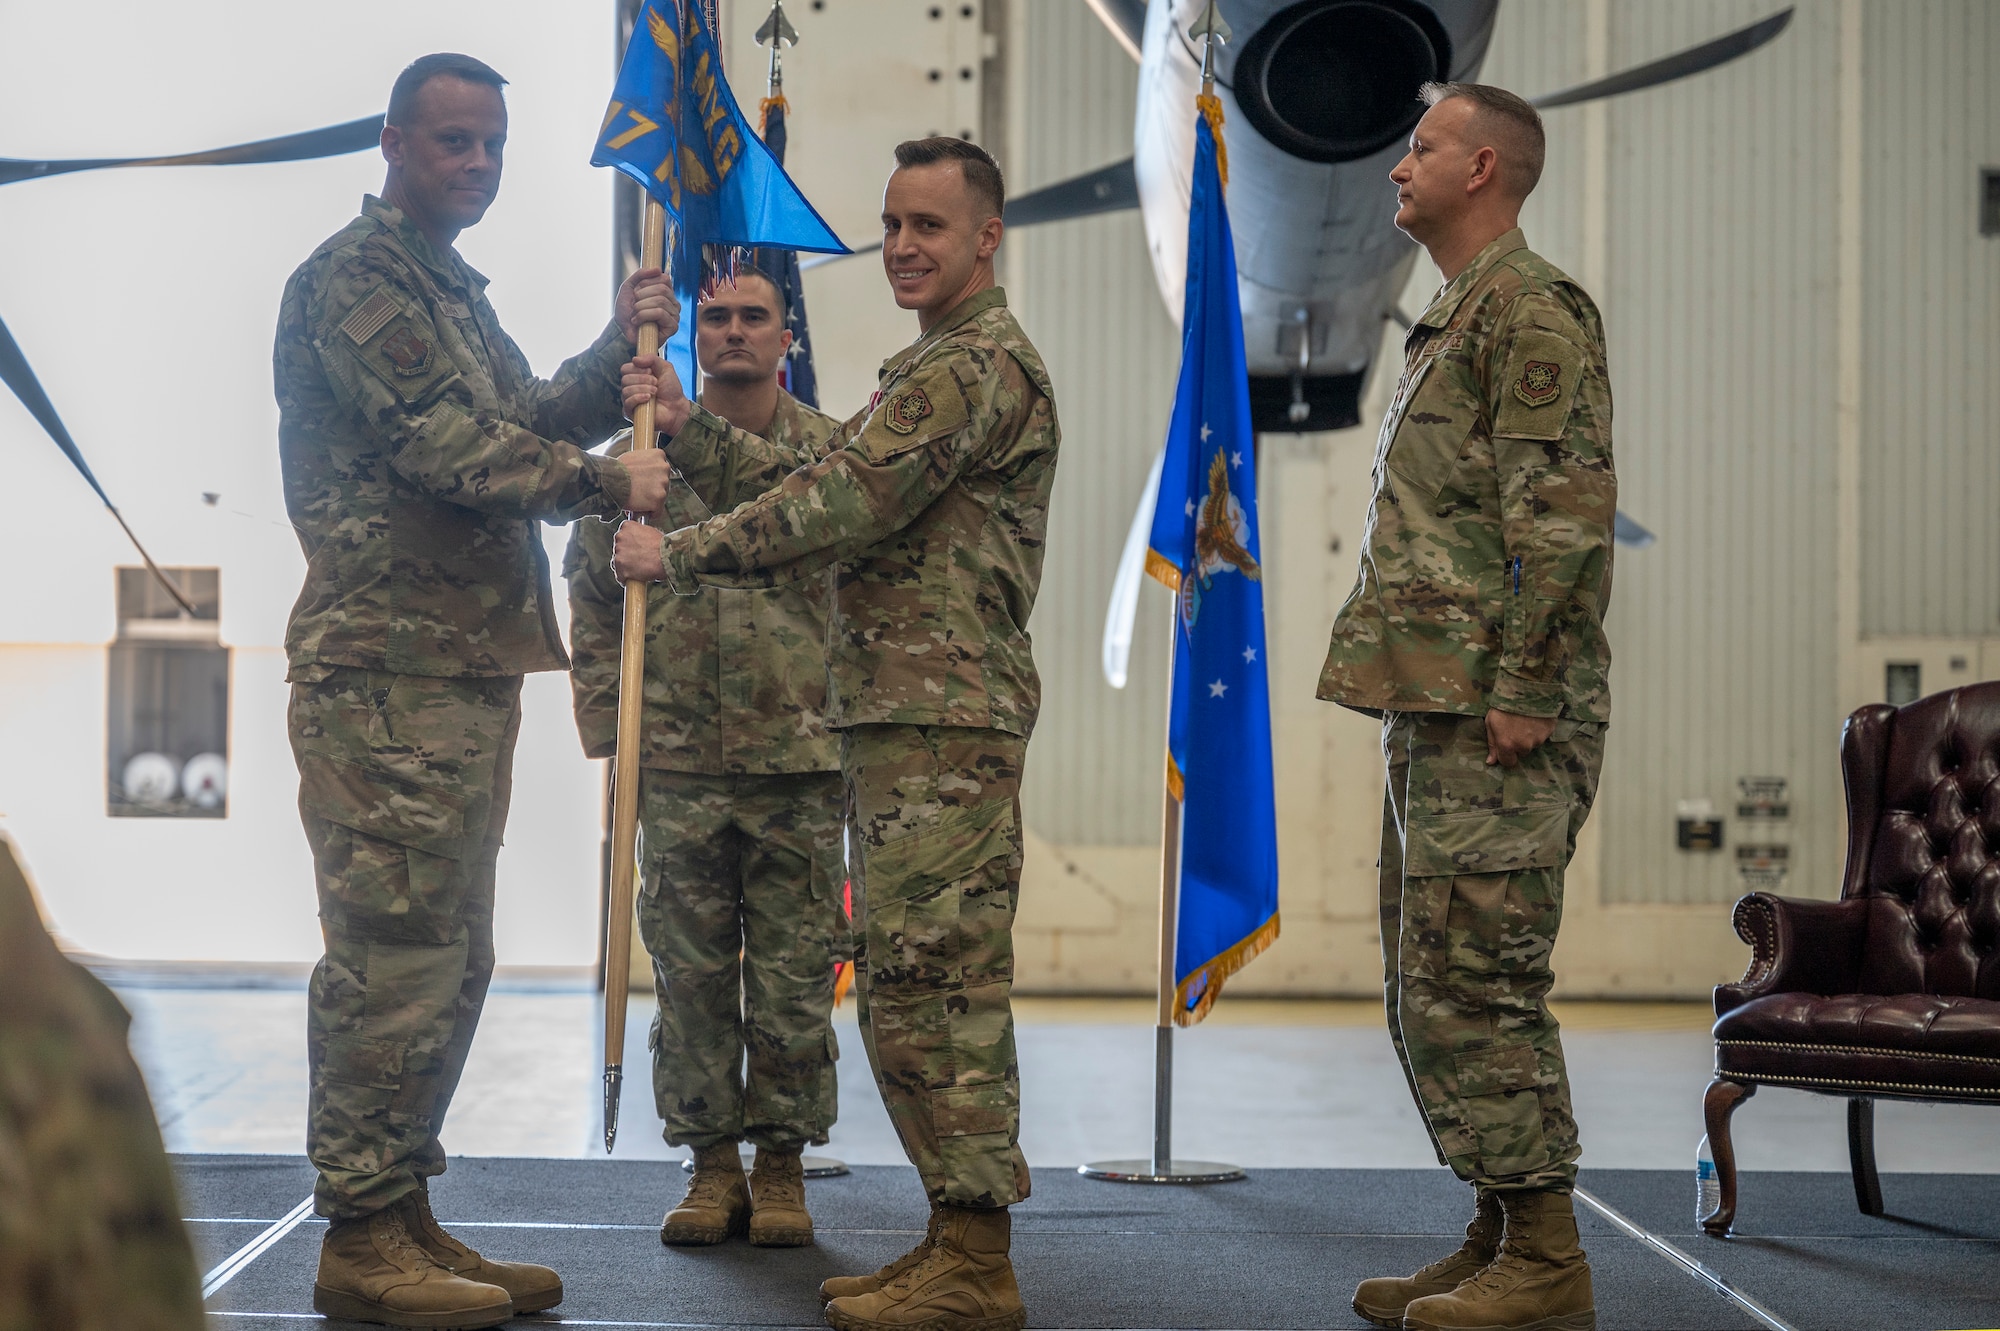 Col. Jeffrey Darden, 317th Maintenance Group commander, takes the Guidon from Maj. Andrew Brock, outgoing 317th Maintenance Squadron commander. After a seven-month tenure as commander, Brock will return to his traditional duties as a C-130J Super Hercules pilot. (U.S. Air Force photo by Senior Airman Reilly McGuire)